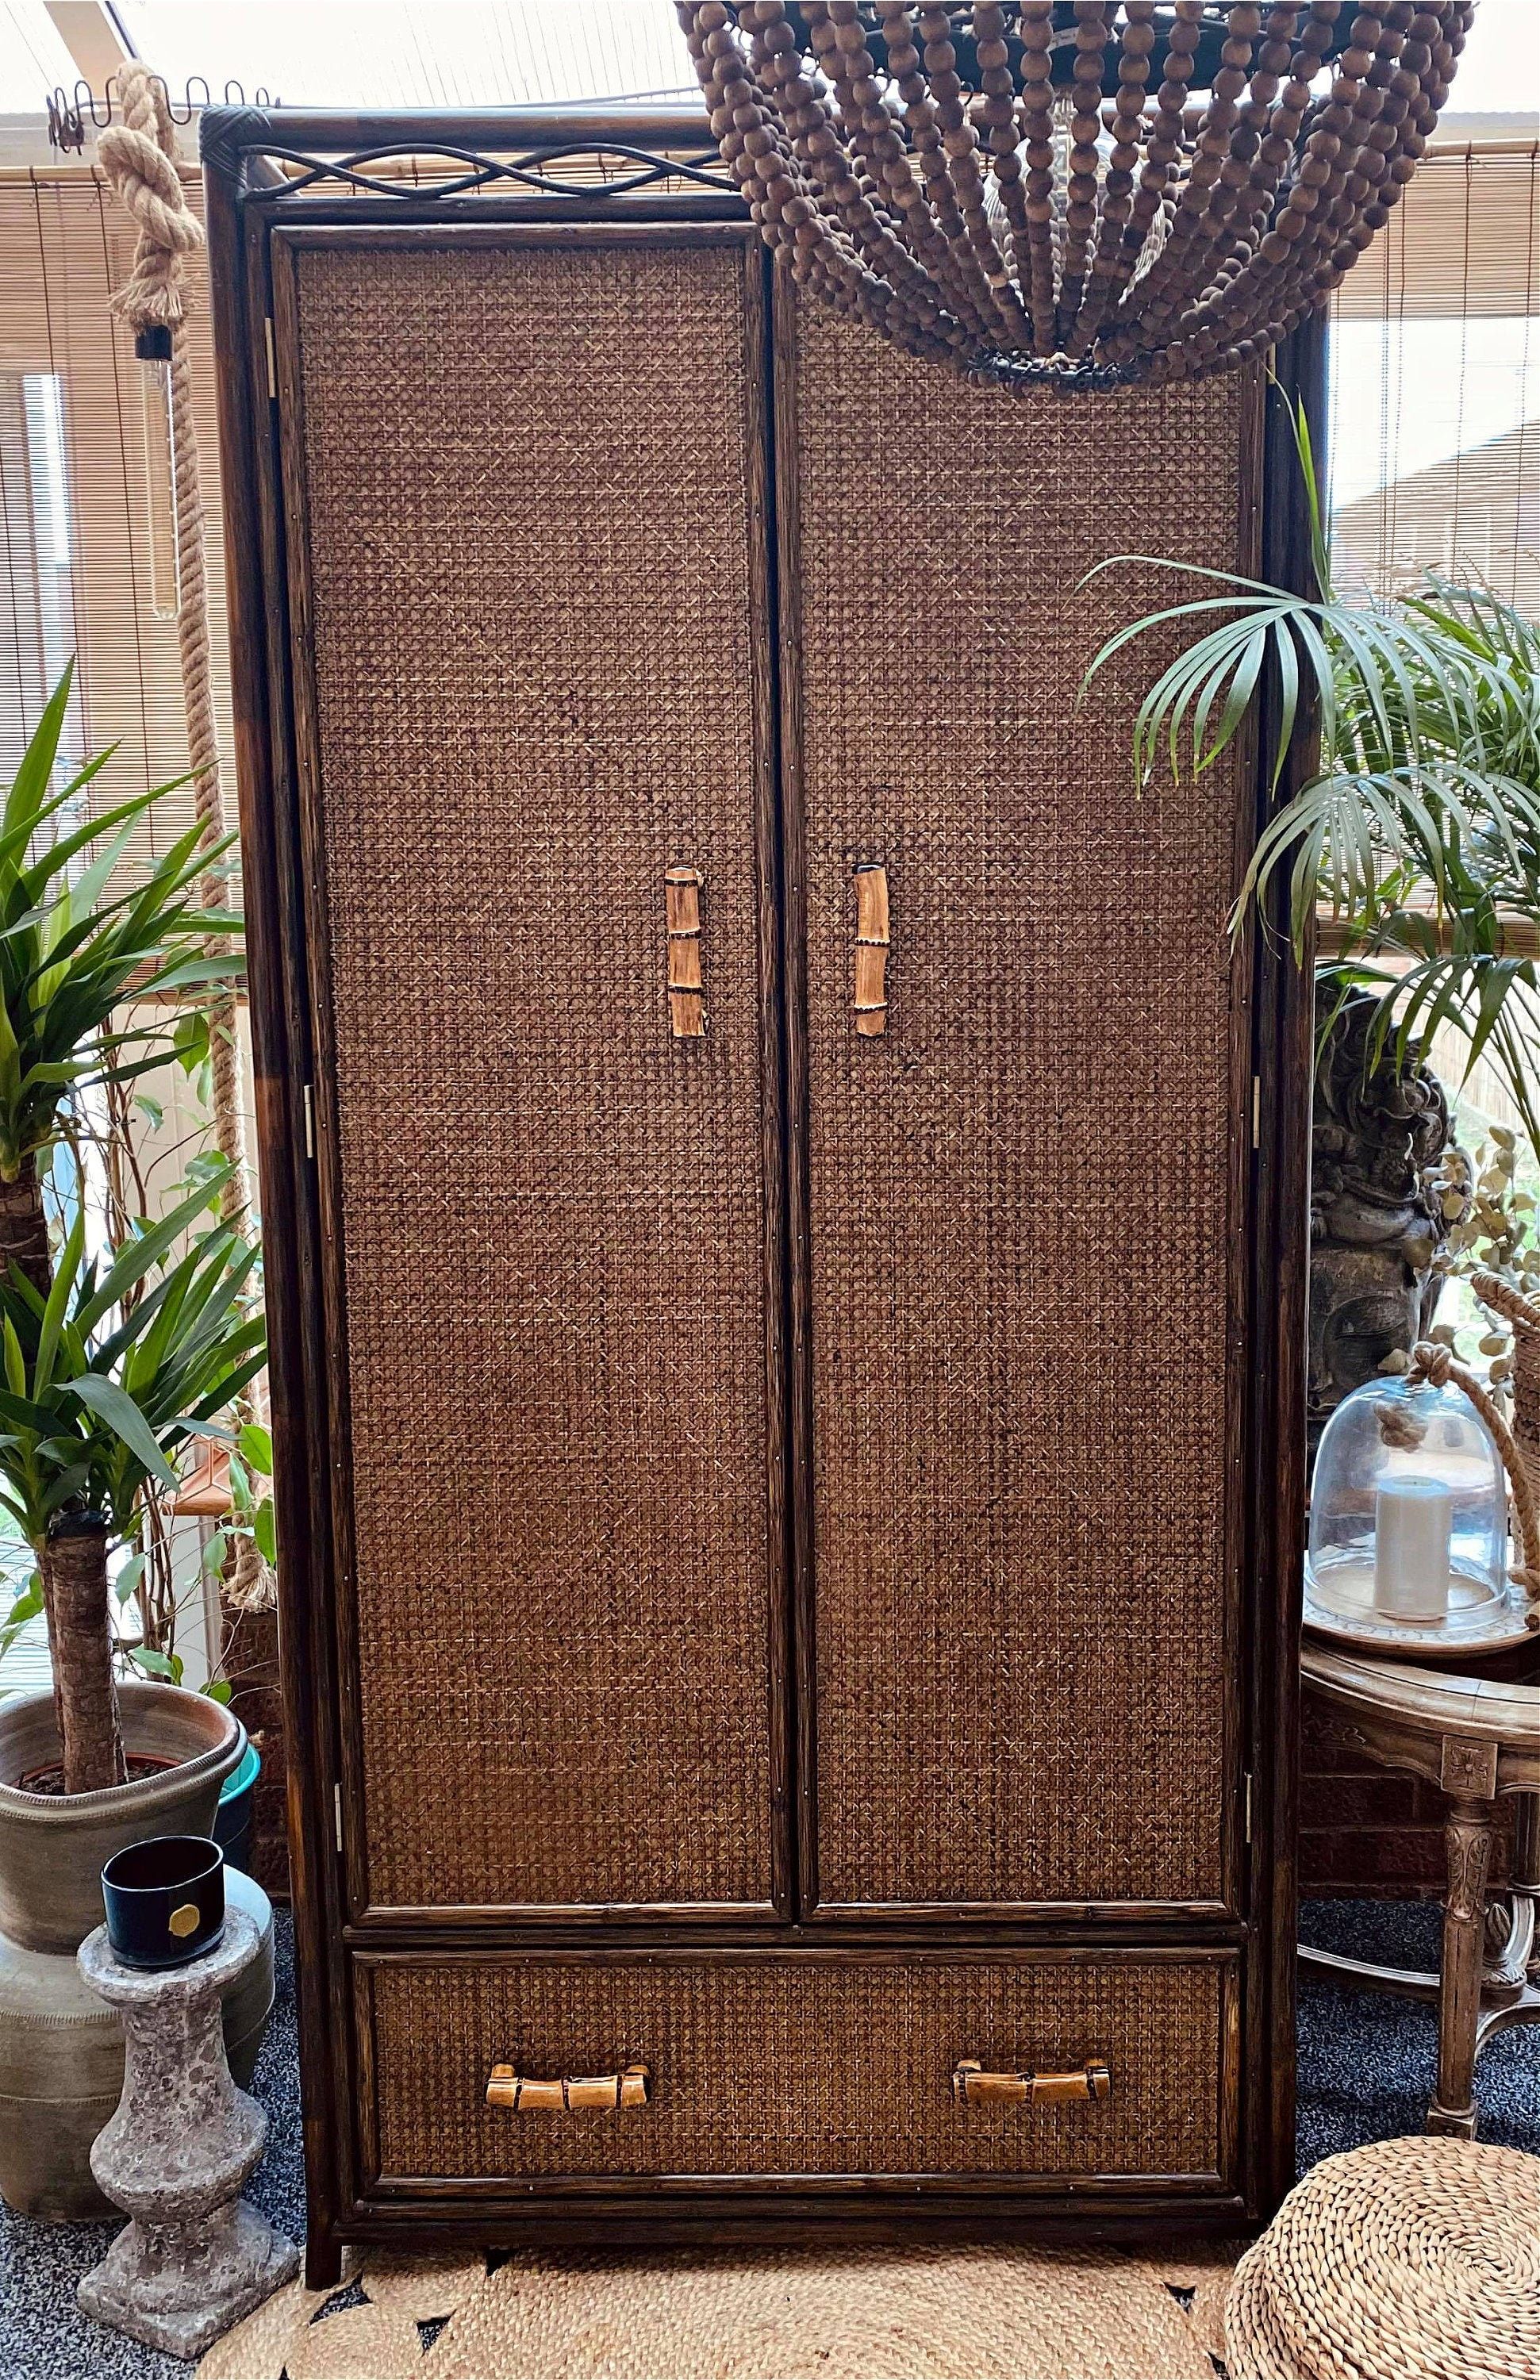 Vintage Bamboo And Cane Wardrobe Rattan Wardrobe Cane – Etsy Uk In Wicker Armoire Wardrobes (View 14 of 15)